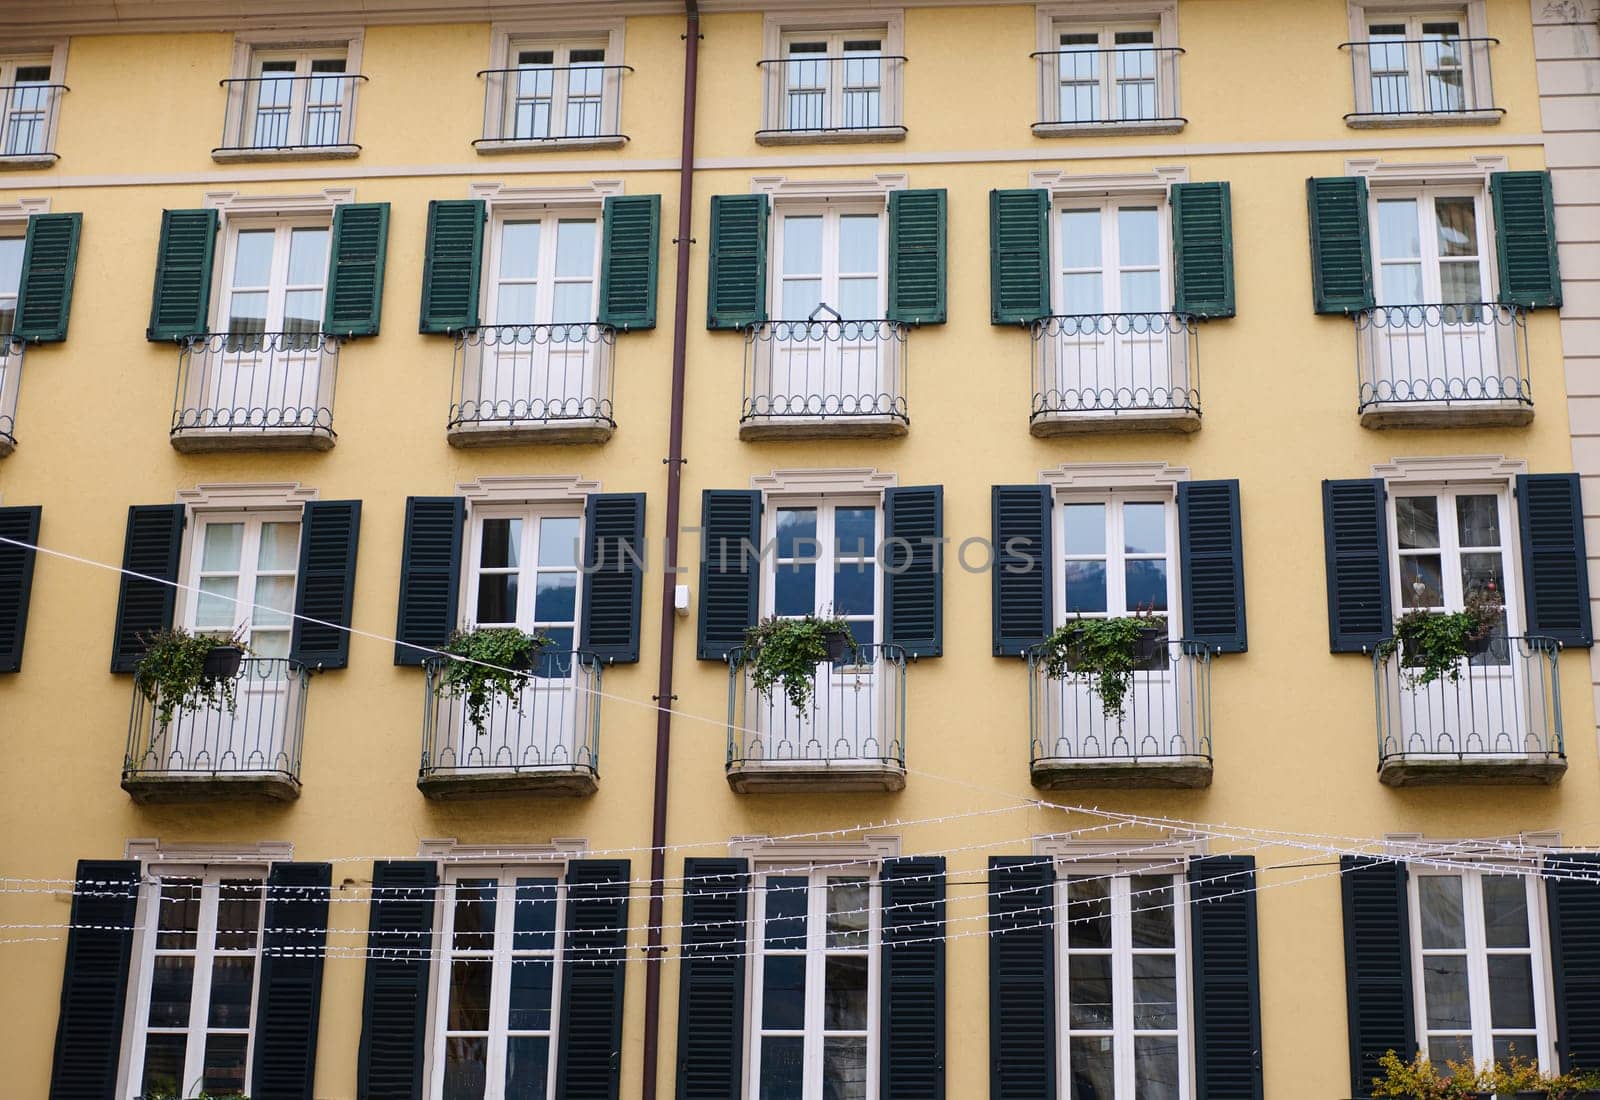 Italian architecture. The facades of a house with beautiful balconies decorated with flowers and plants in the city center of Italian Como in Lombardy